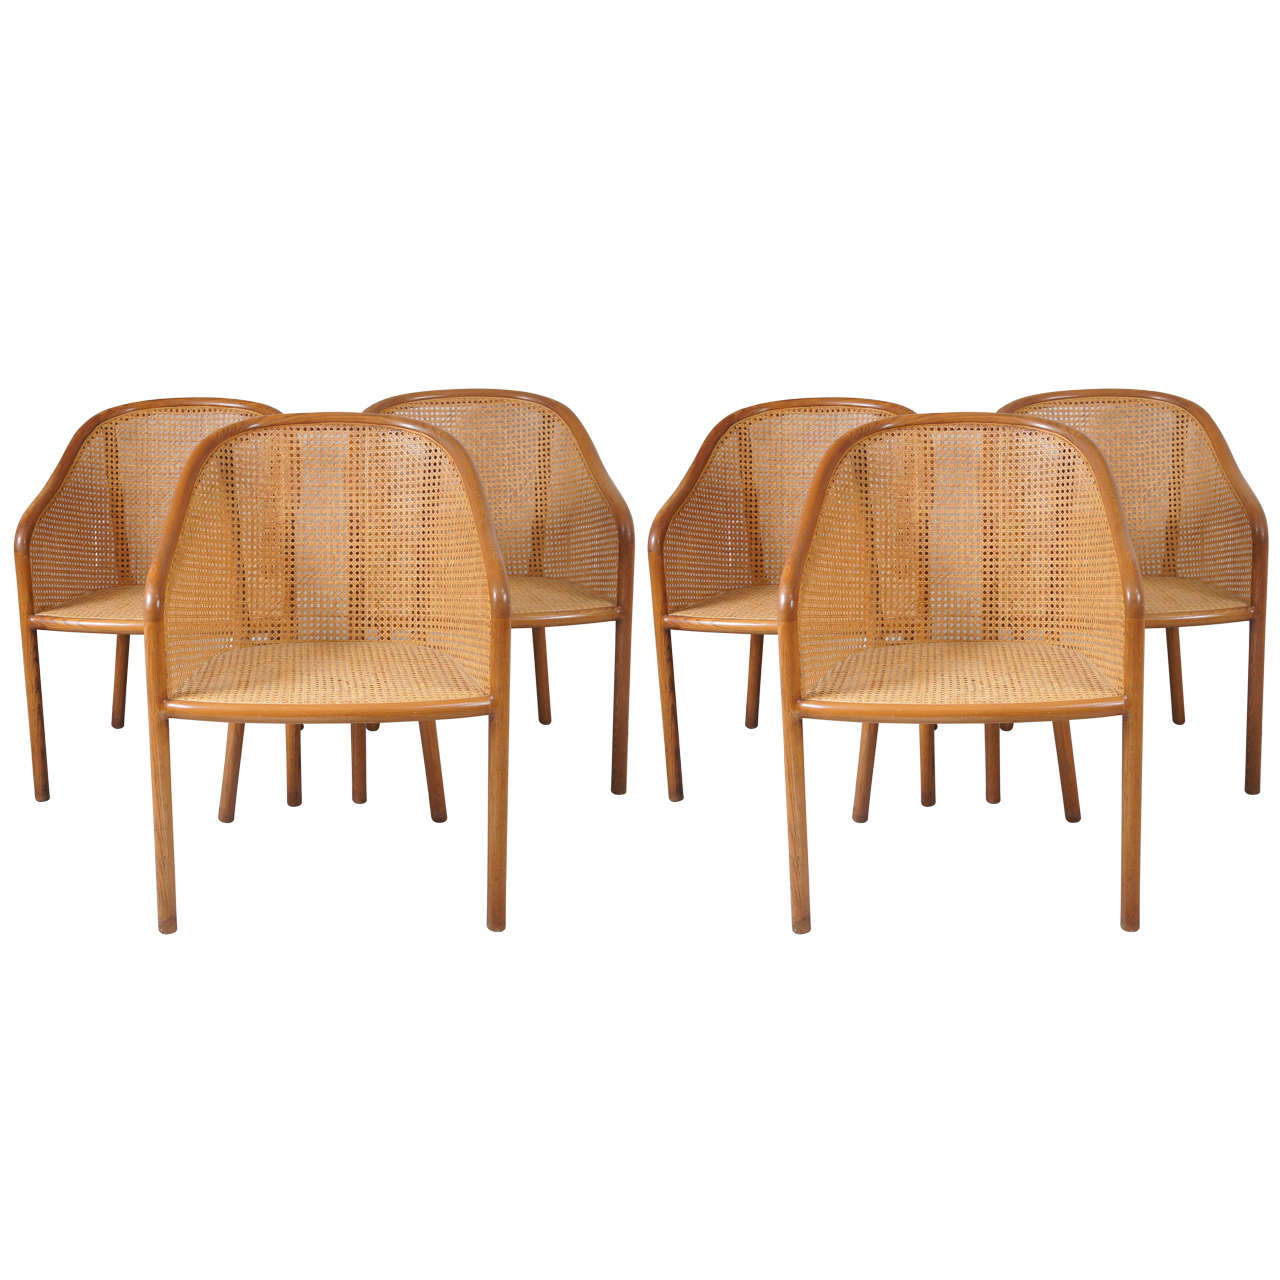 Four Ward Bennett Caned Chairs